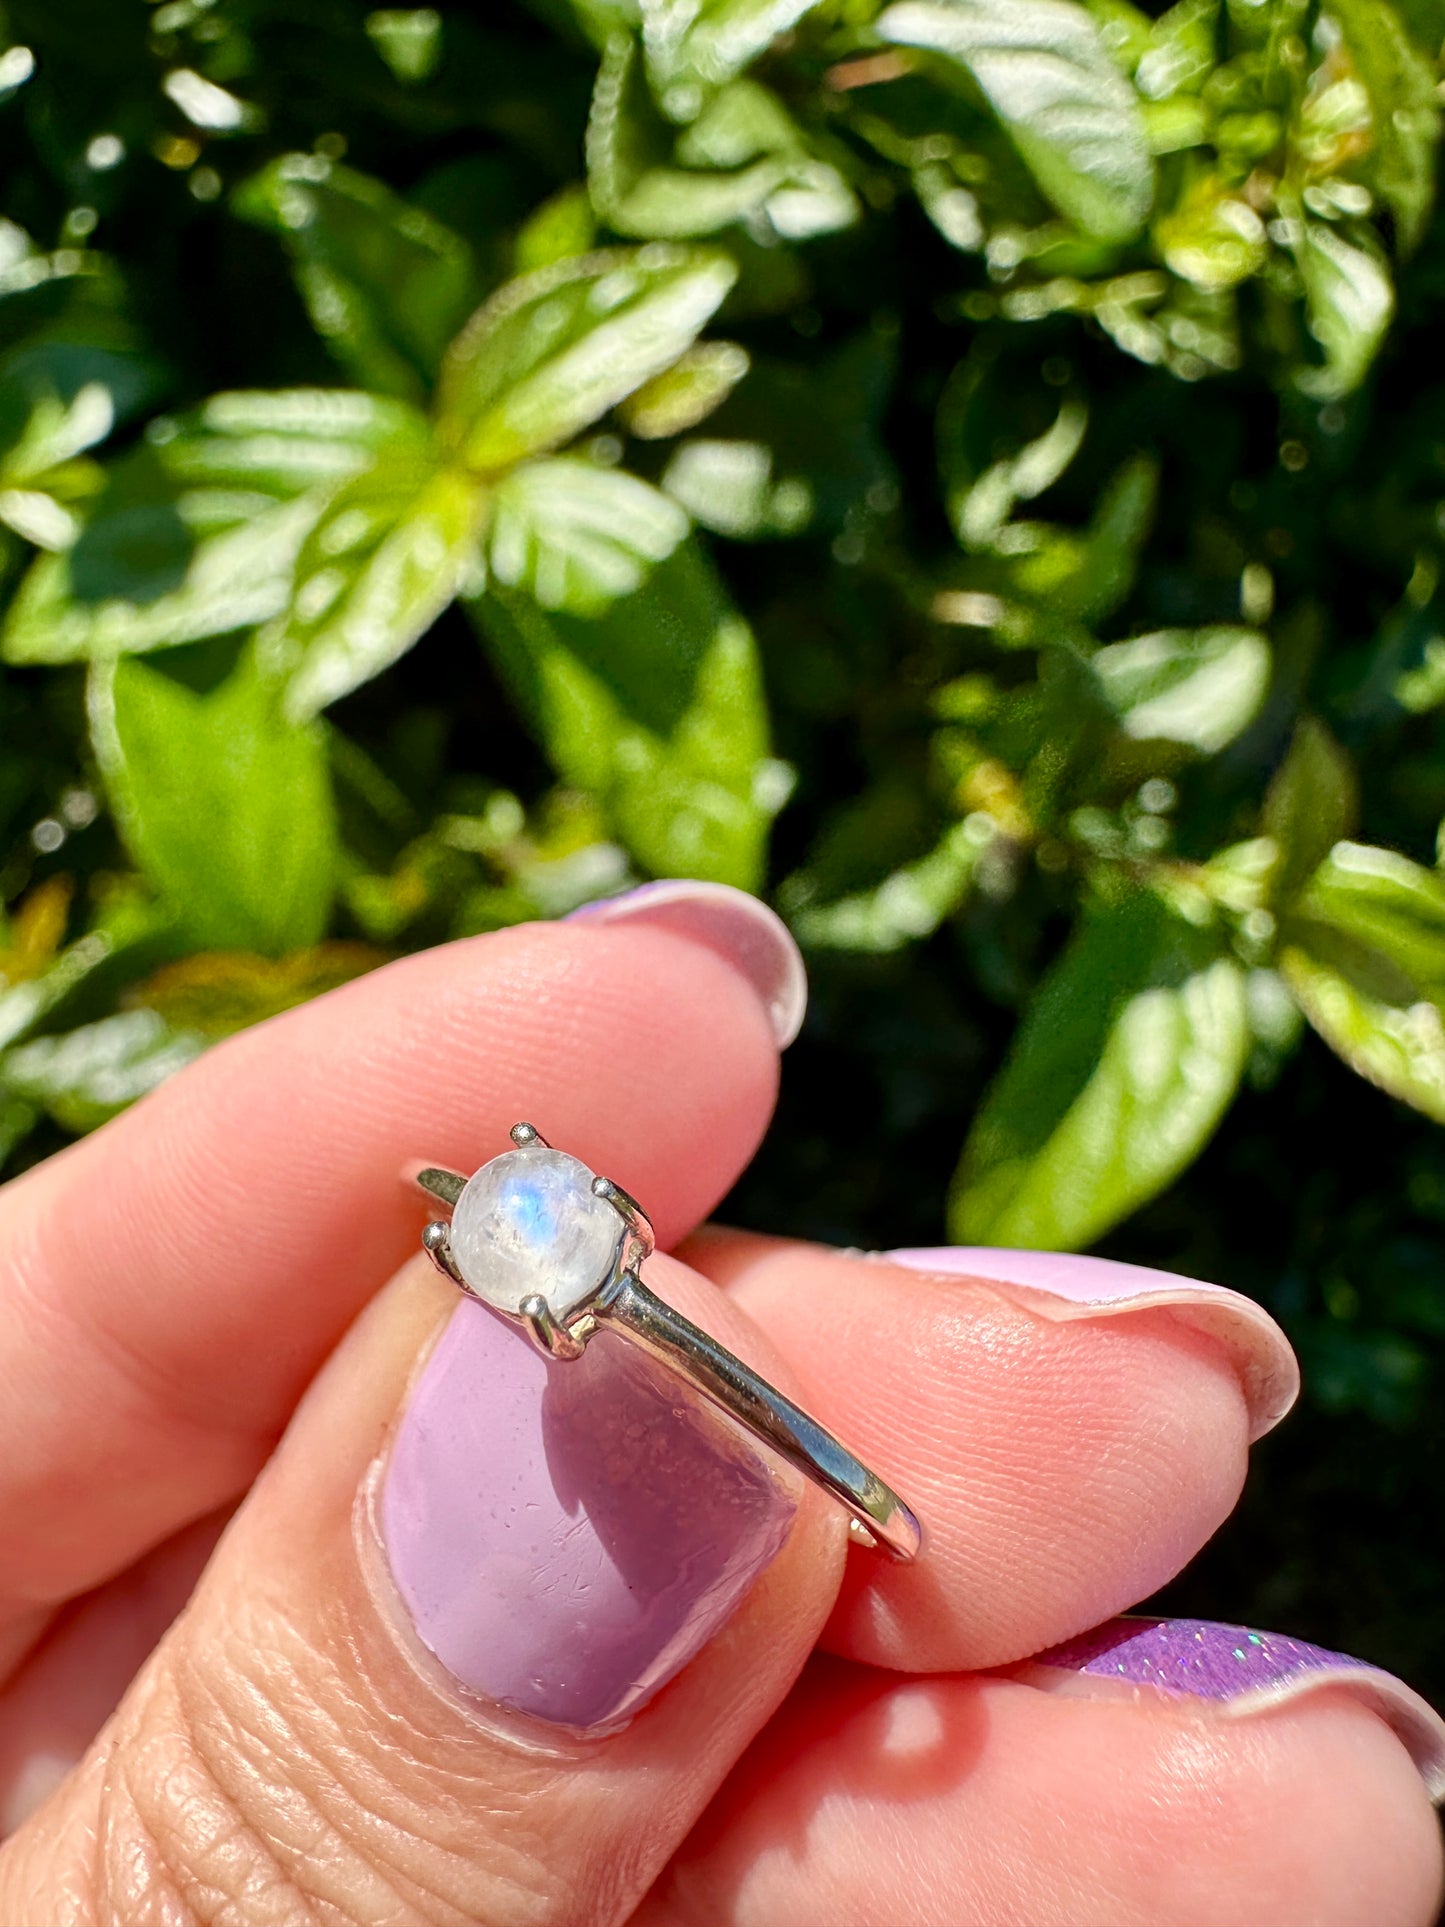 Sterling Silver Moonstone Ring Size 6, Captivating Handcrafted Gemstone Jewelry, Mystical Lunar Inspired Accessory, Unique Gift Idea